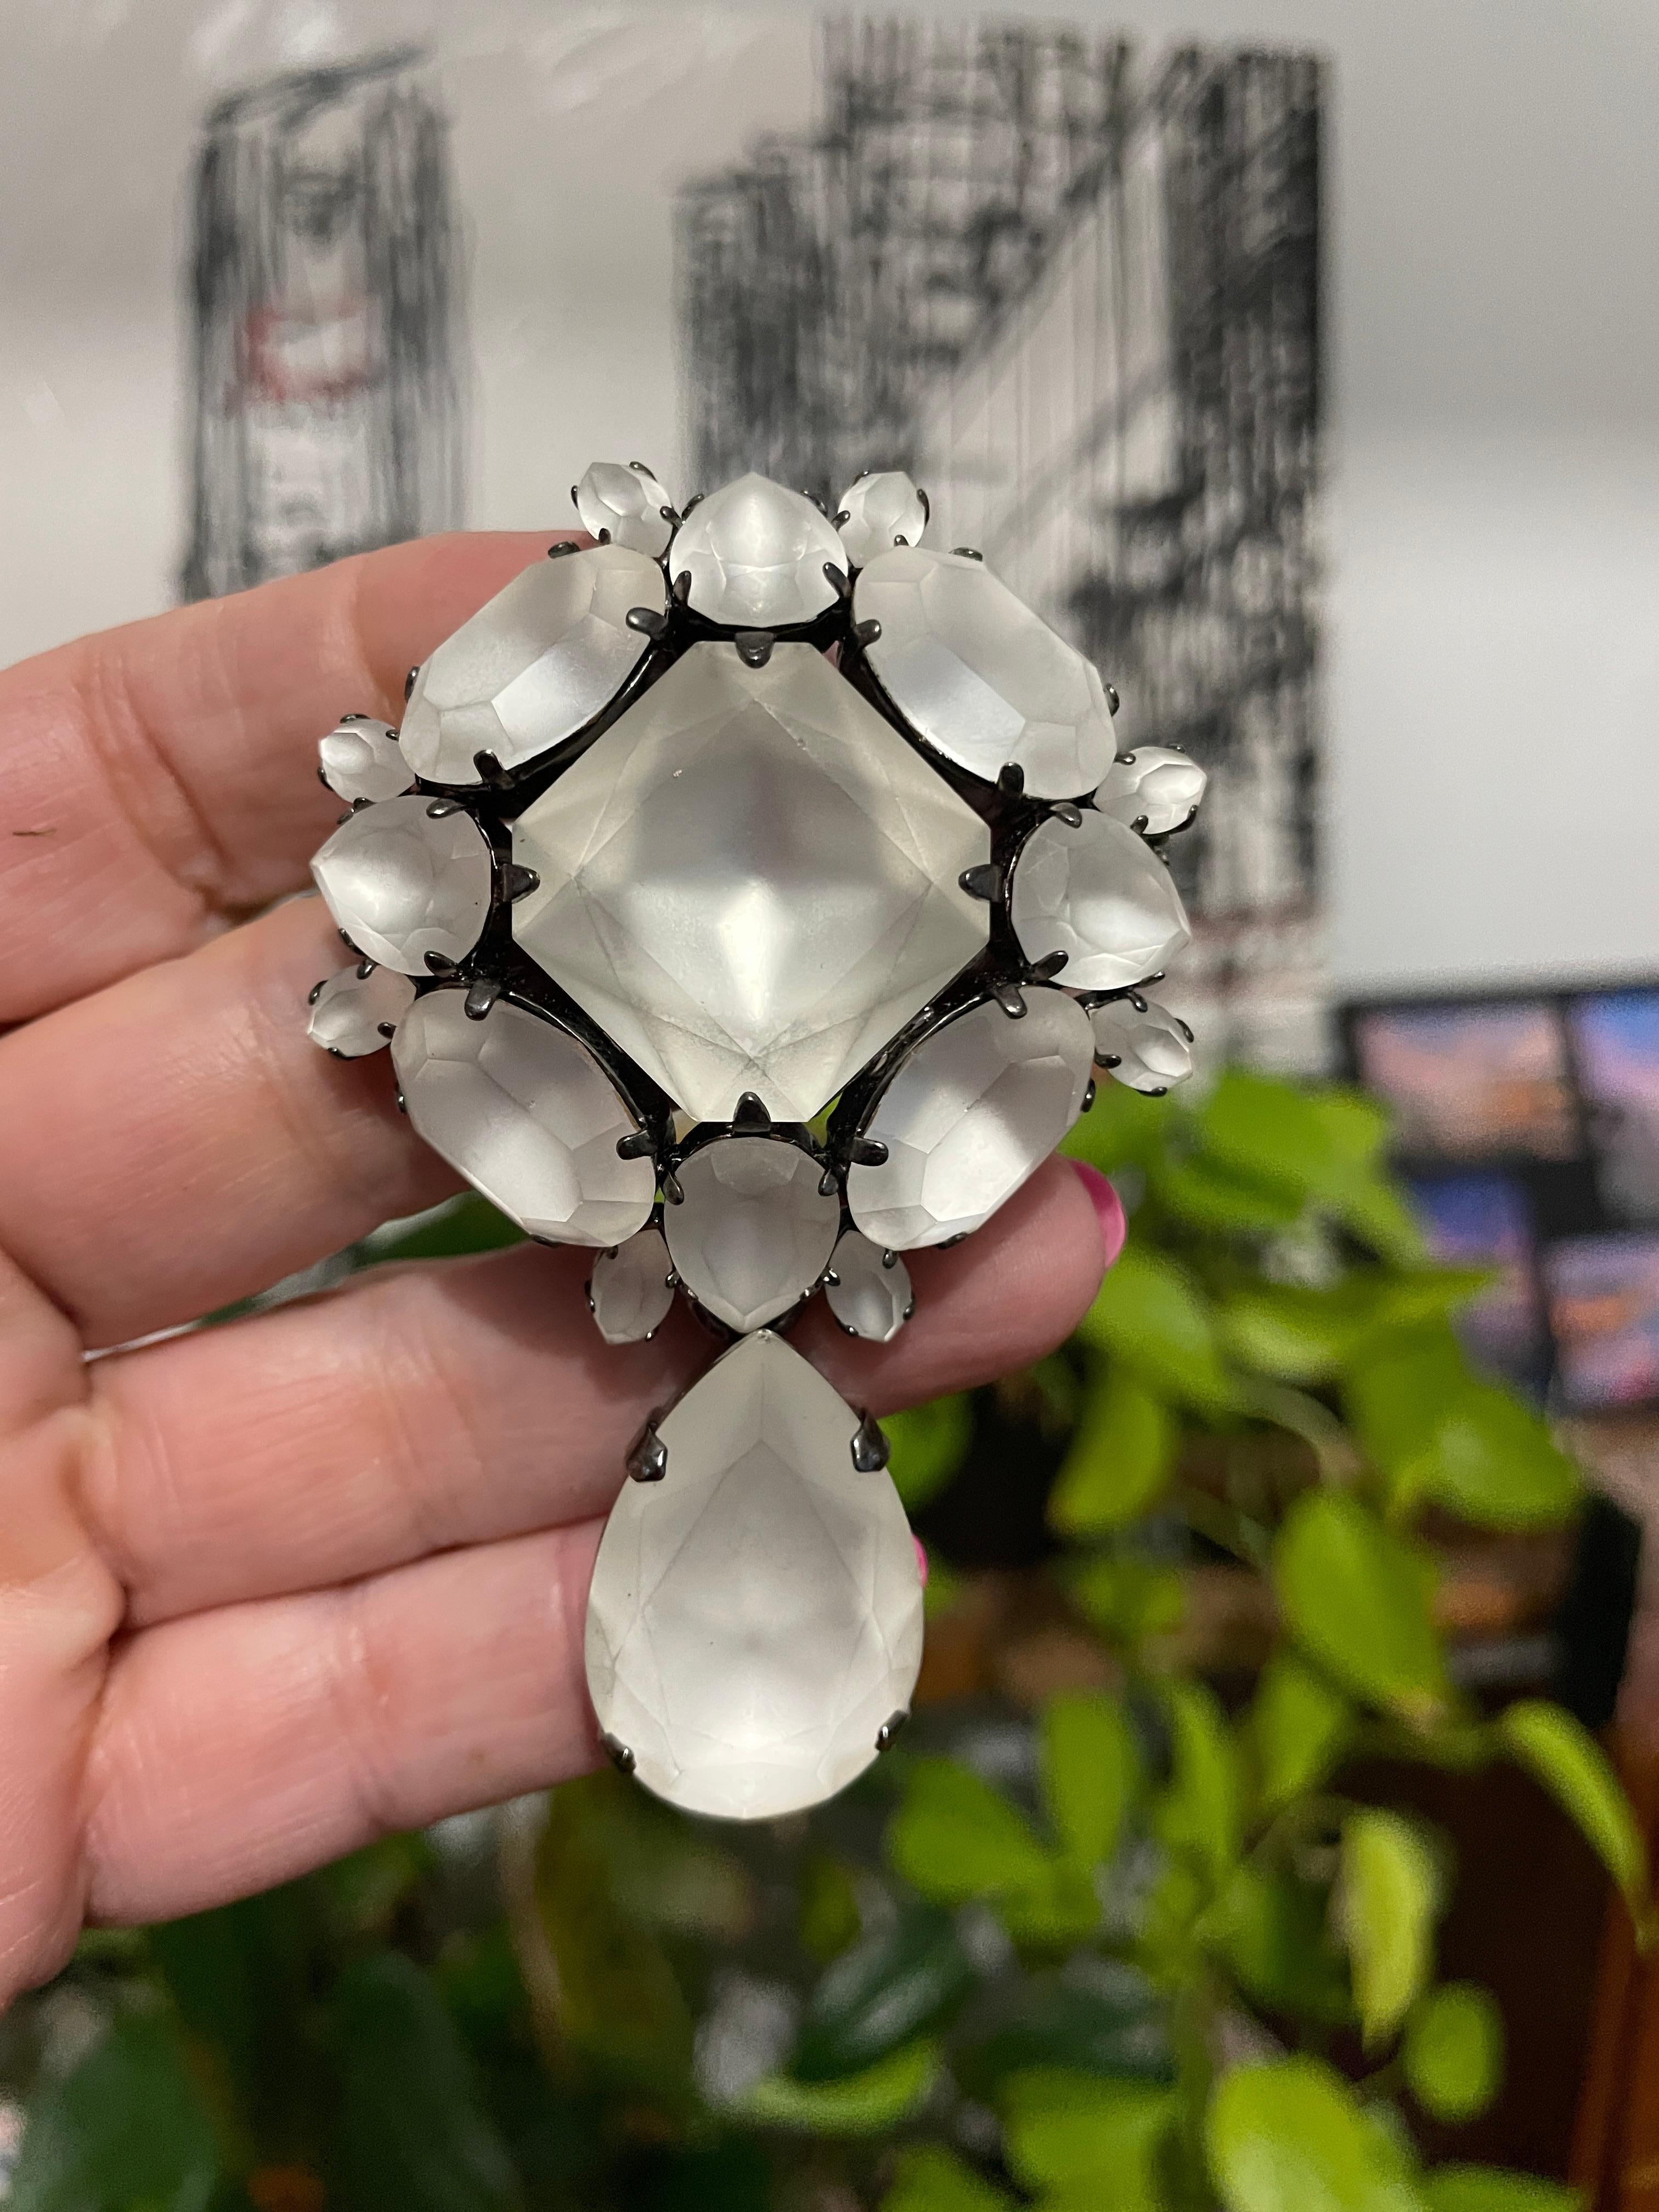 Made in France at his studio is this stunning Ferrandis Dangle Brooch. *Matte Crystals *Prong set faceted pears, ovals, and square stones *swarovski Crystals. Matching pieces available on our storefront. Philippe Ferrandis is an internationally